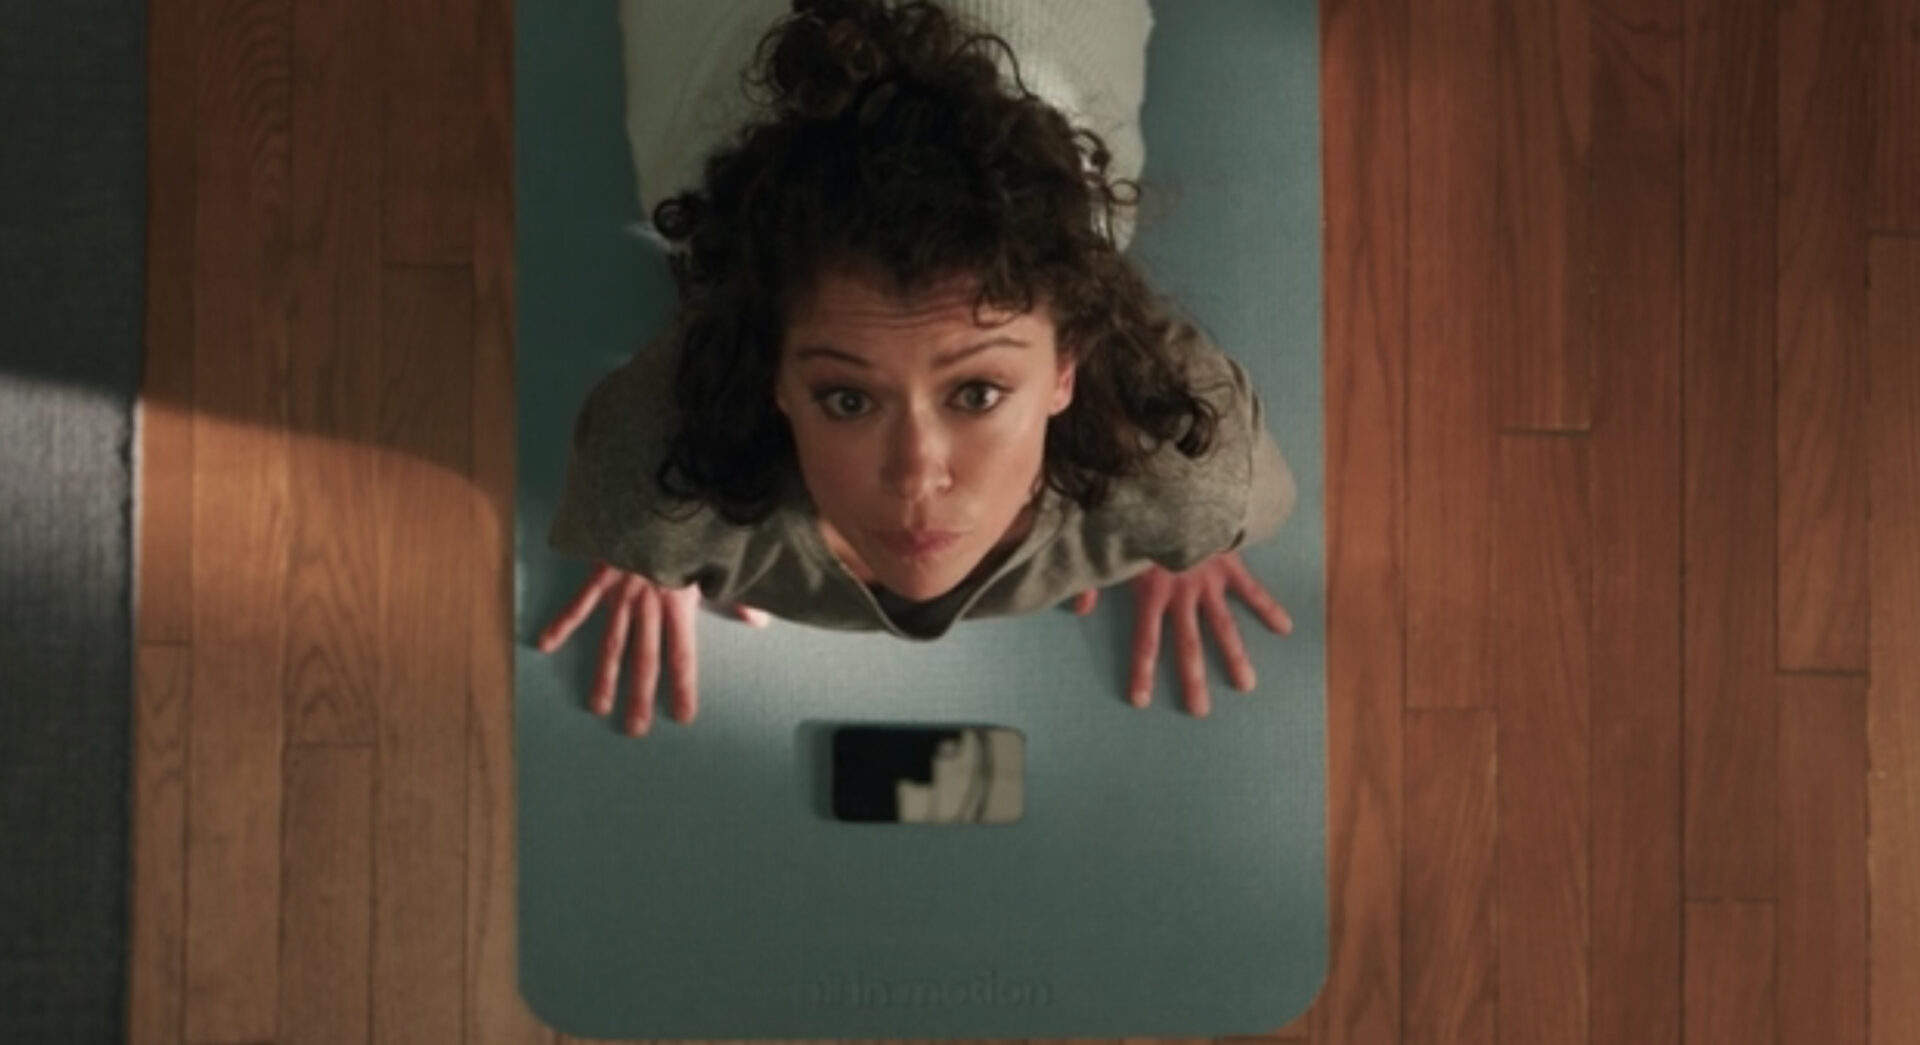 Jennifer Walters (Tatiana Maslany) stretches before her job as a New York City attorney in a still from She-Hulk clip